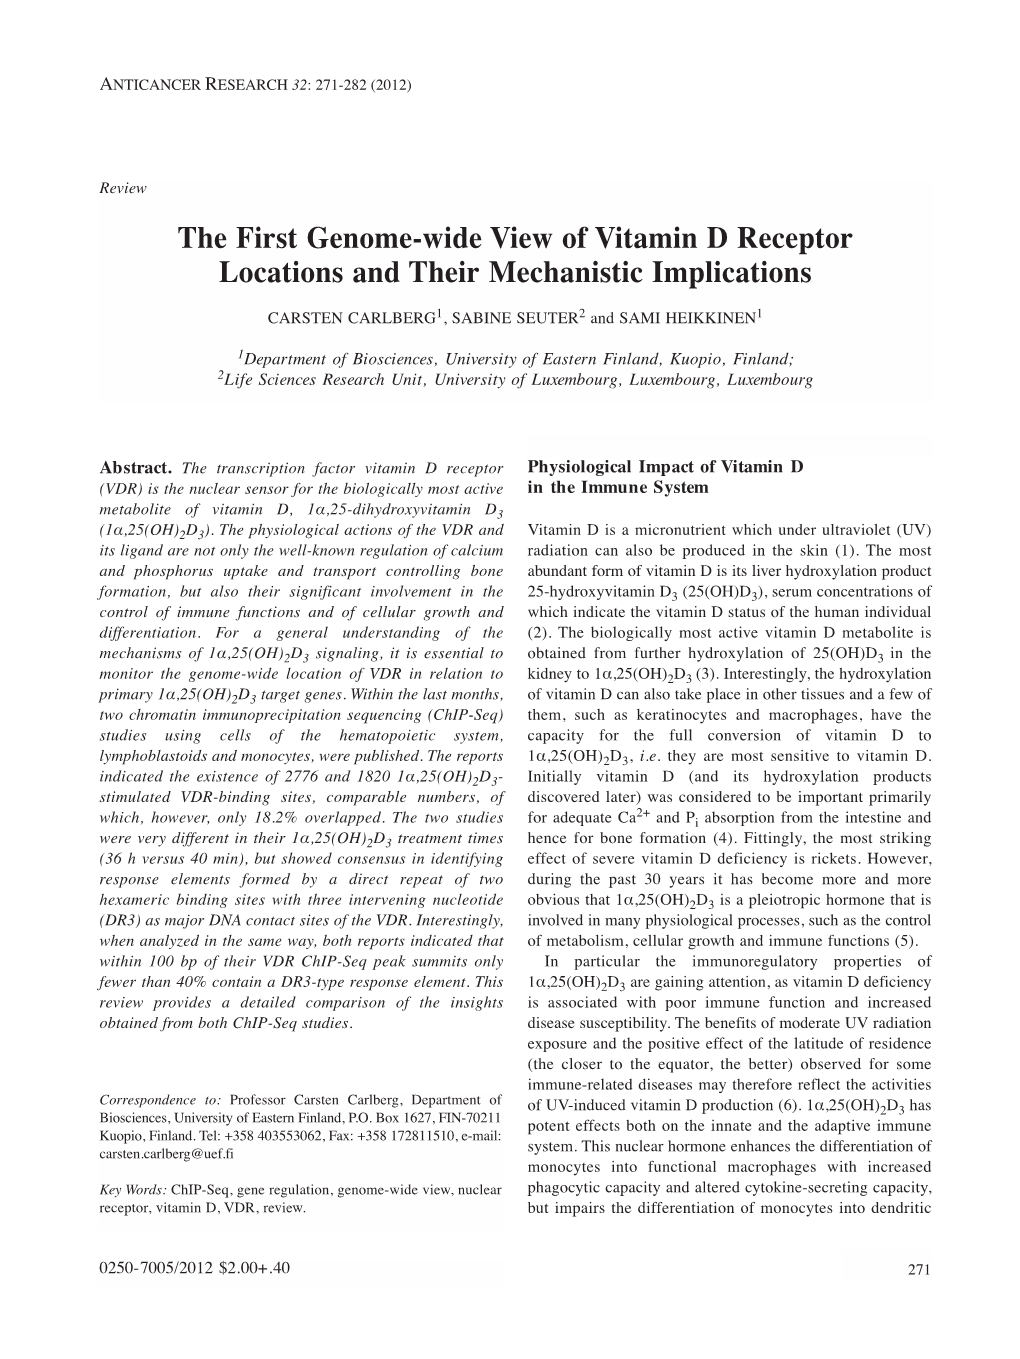 The First Genome-Wide View of Vitamin D Receptor Locations and Their Mechanistic Implications